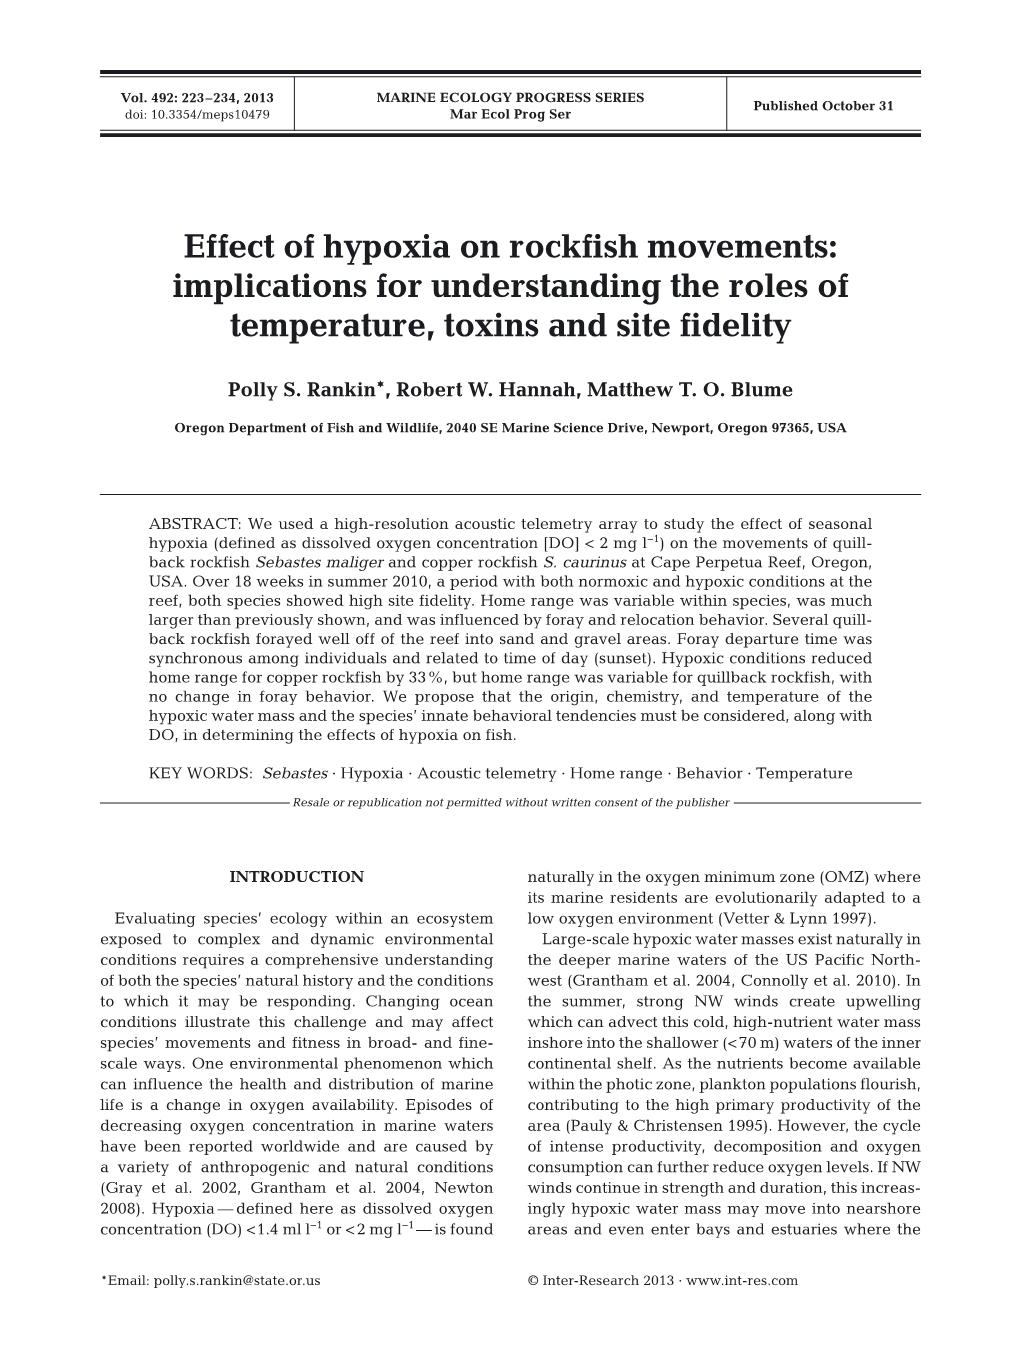 Effect of Hypoxia on Rockfish Movements: Implications for Understanding the Roles of Temperature, Toxins and Site Fidelity